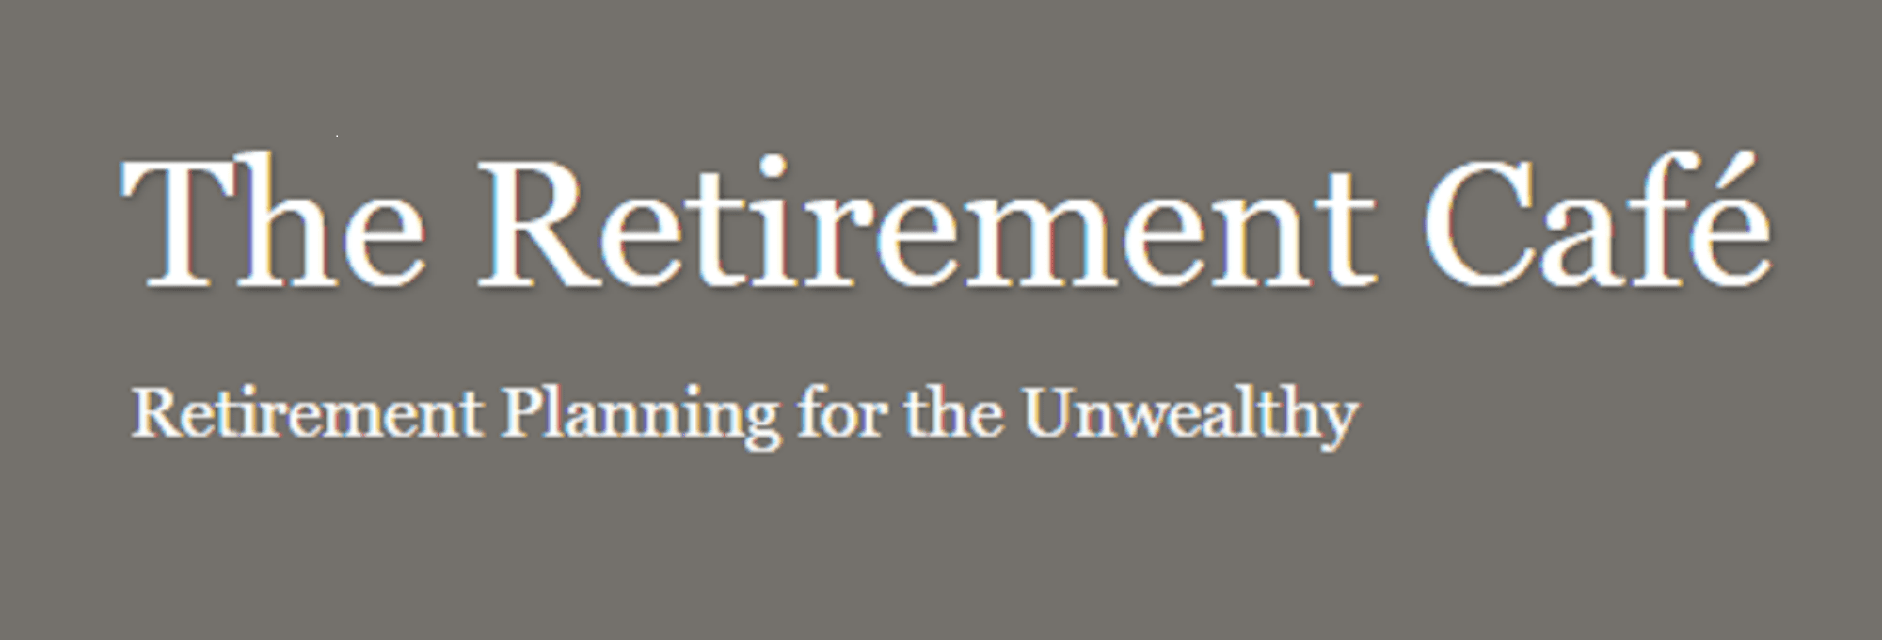 Black and White Retirement Logo - 10 Retirement Blogs That Are Worth Your Time